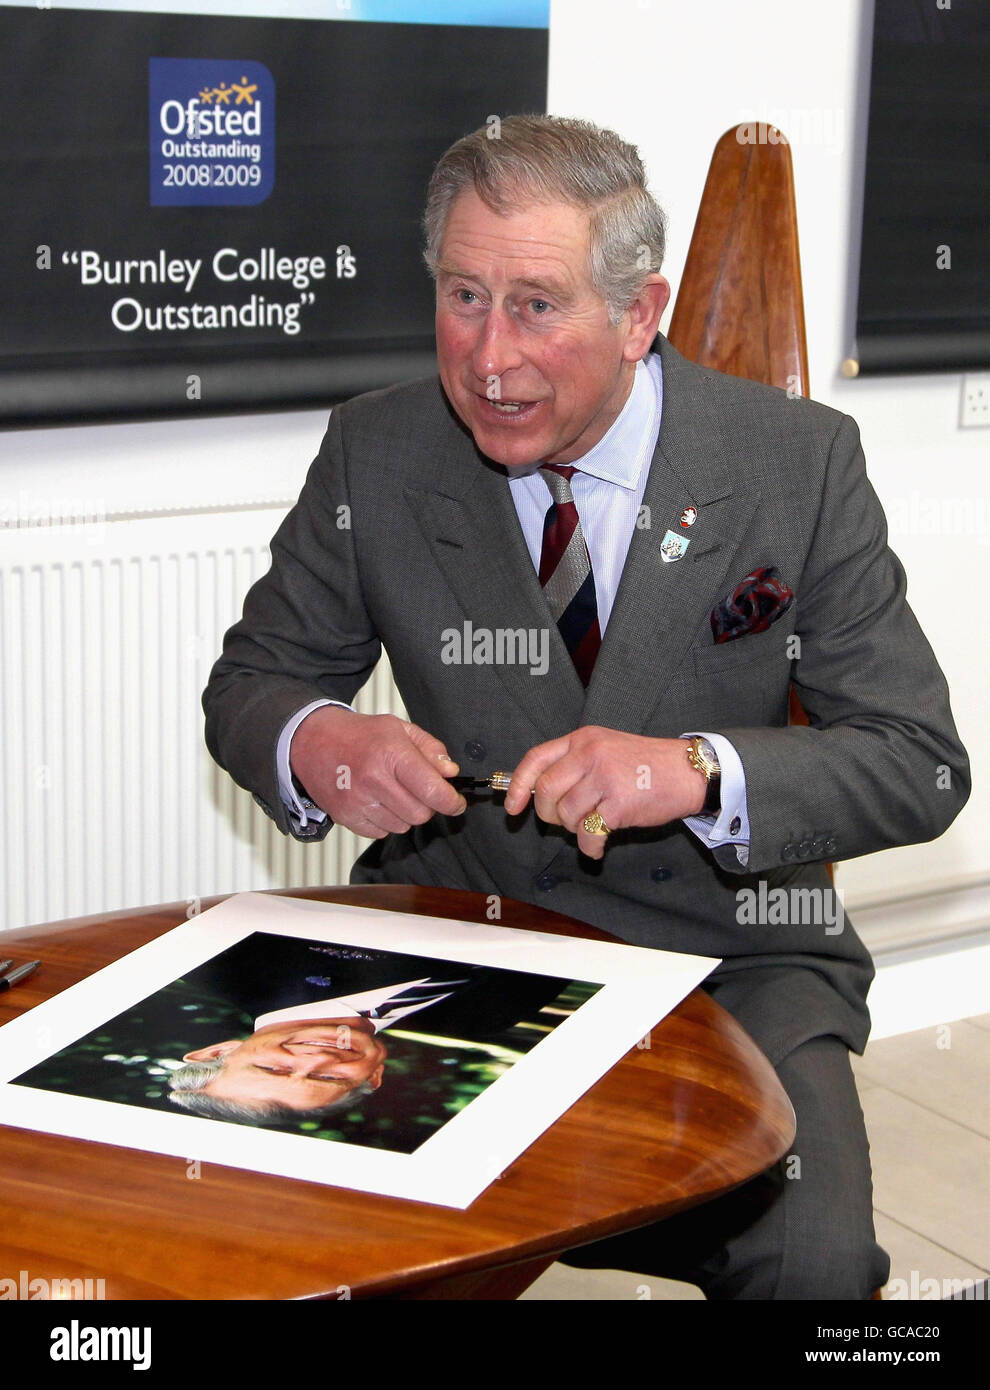 The Prince of Wales signs a portrait as he visits Burnley College / University of Central Lancashire Campus in Burnley, Lancashire. Stock Photo